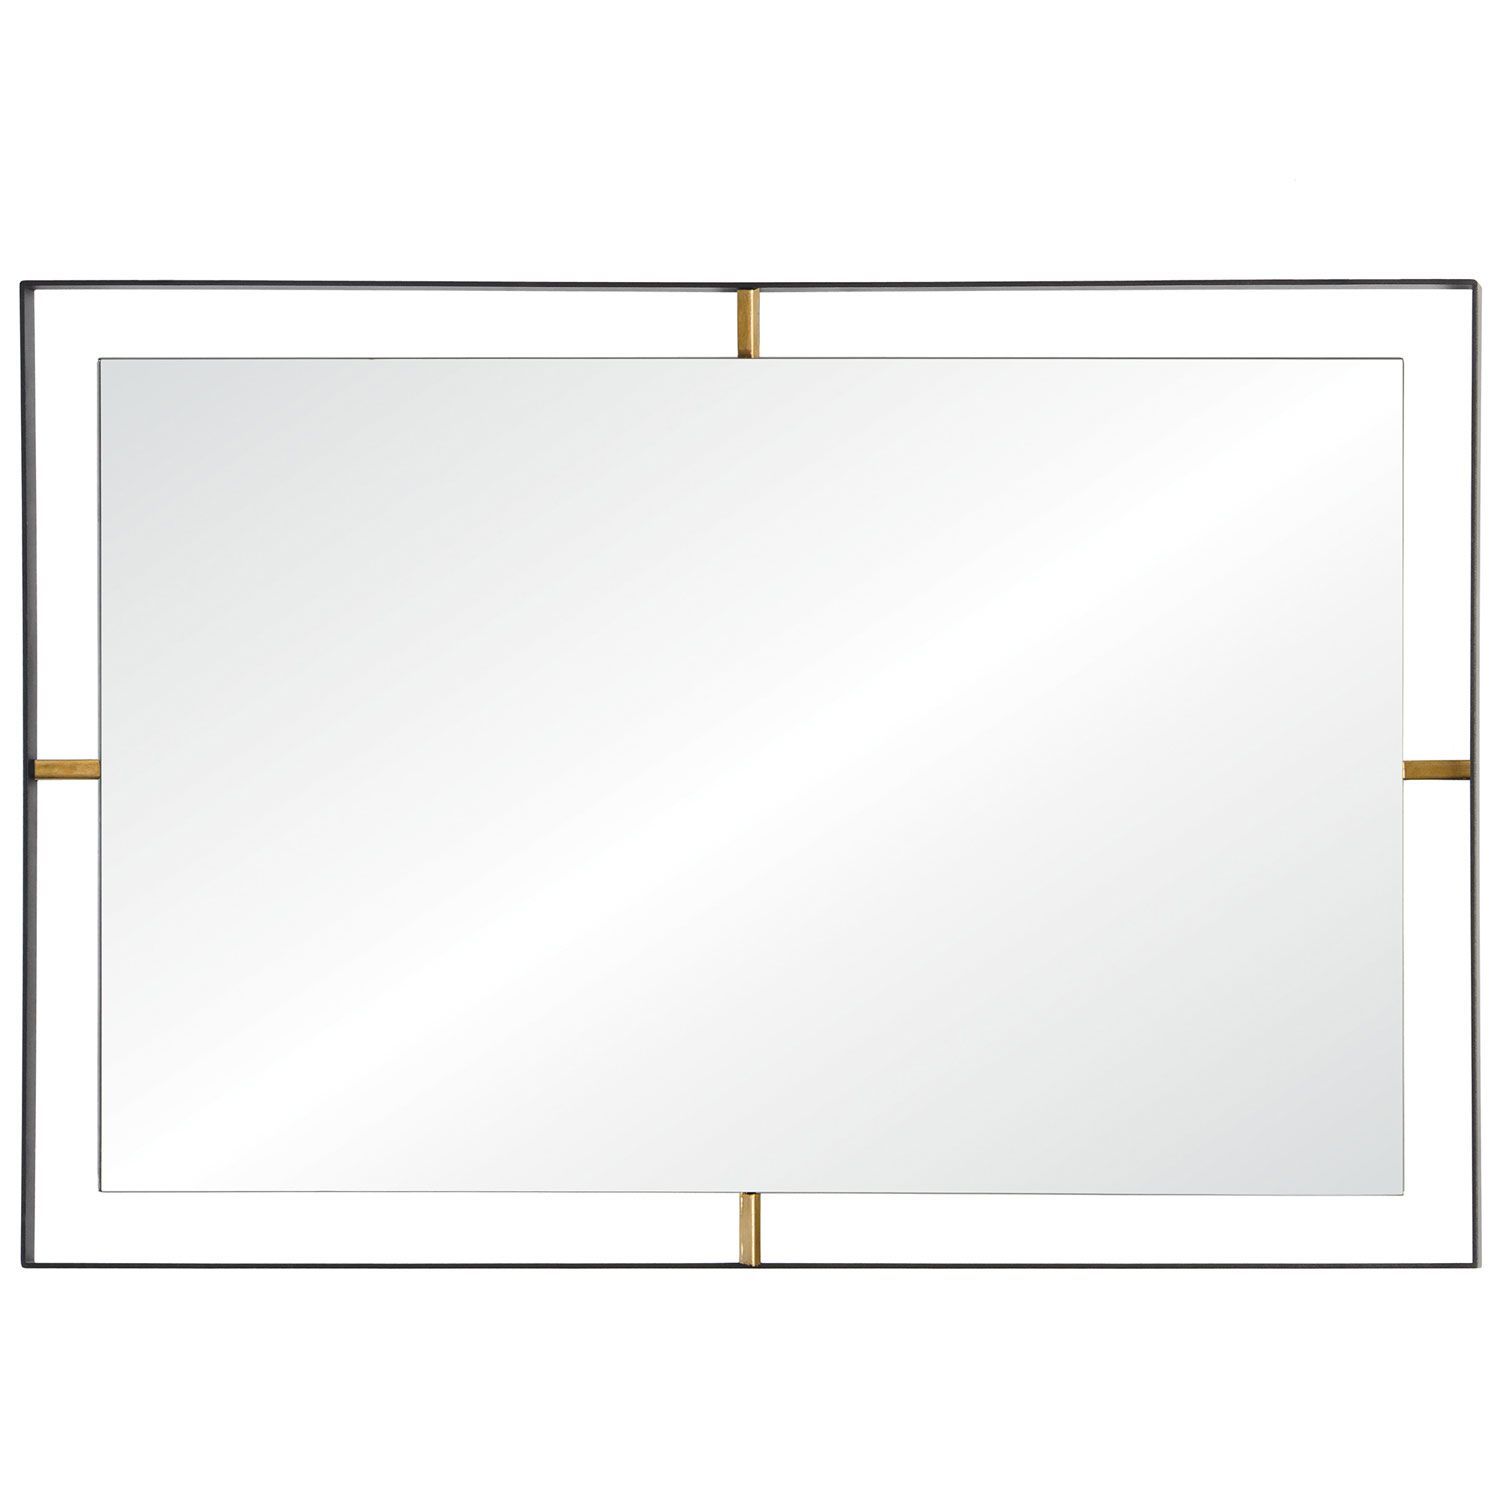 Varaluz Casa Framed Matte Black Rectangle Mirror 610030 | Bellacor For Matte Black Square Wall Mirrors (View 2 of 15)